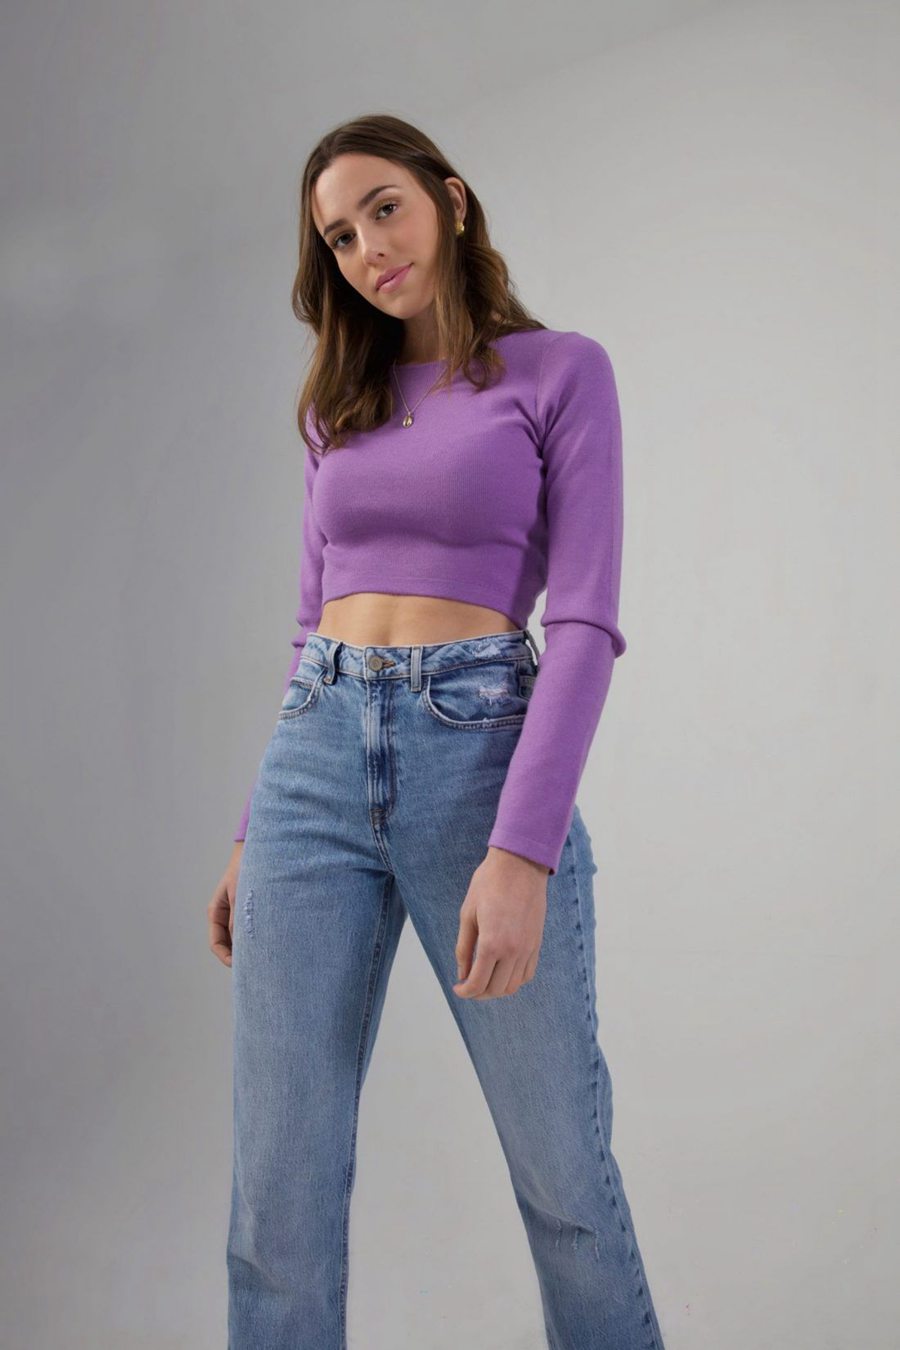 Purple Crop Top with Blue Jeans